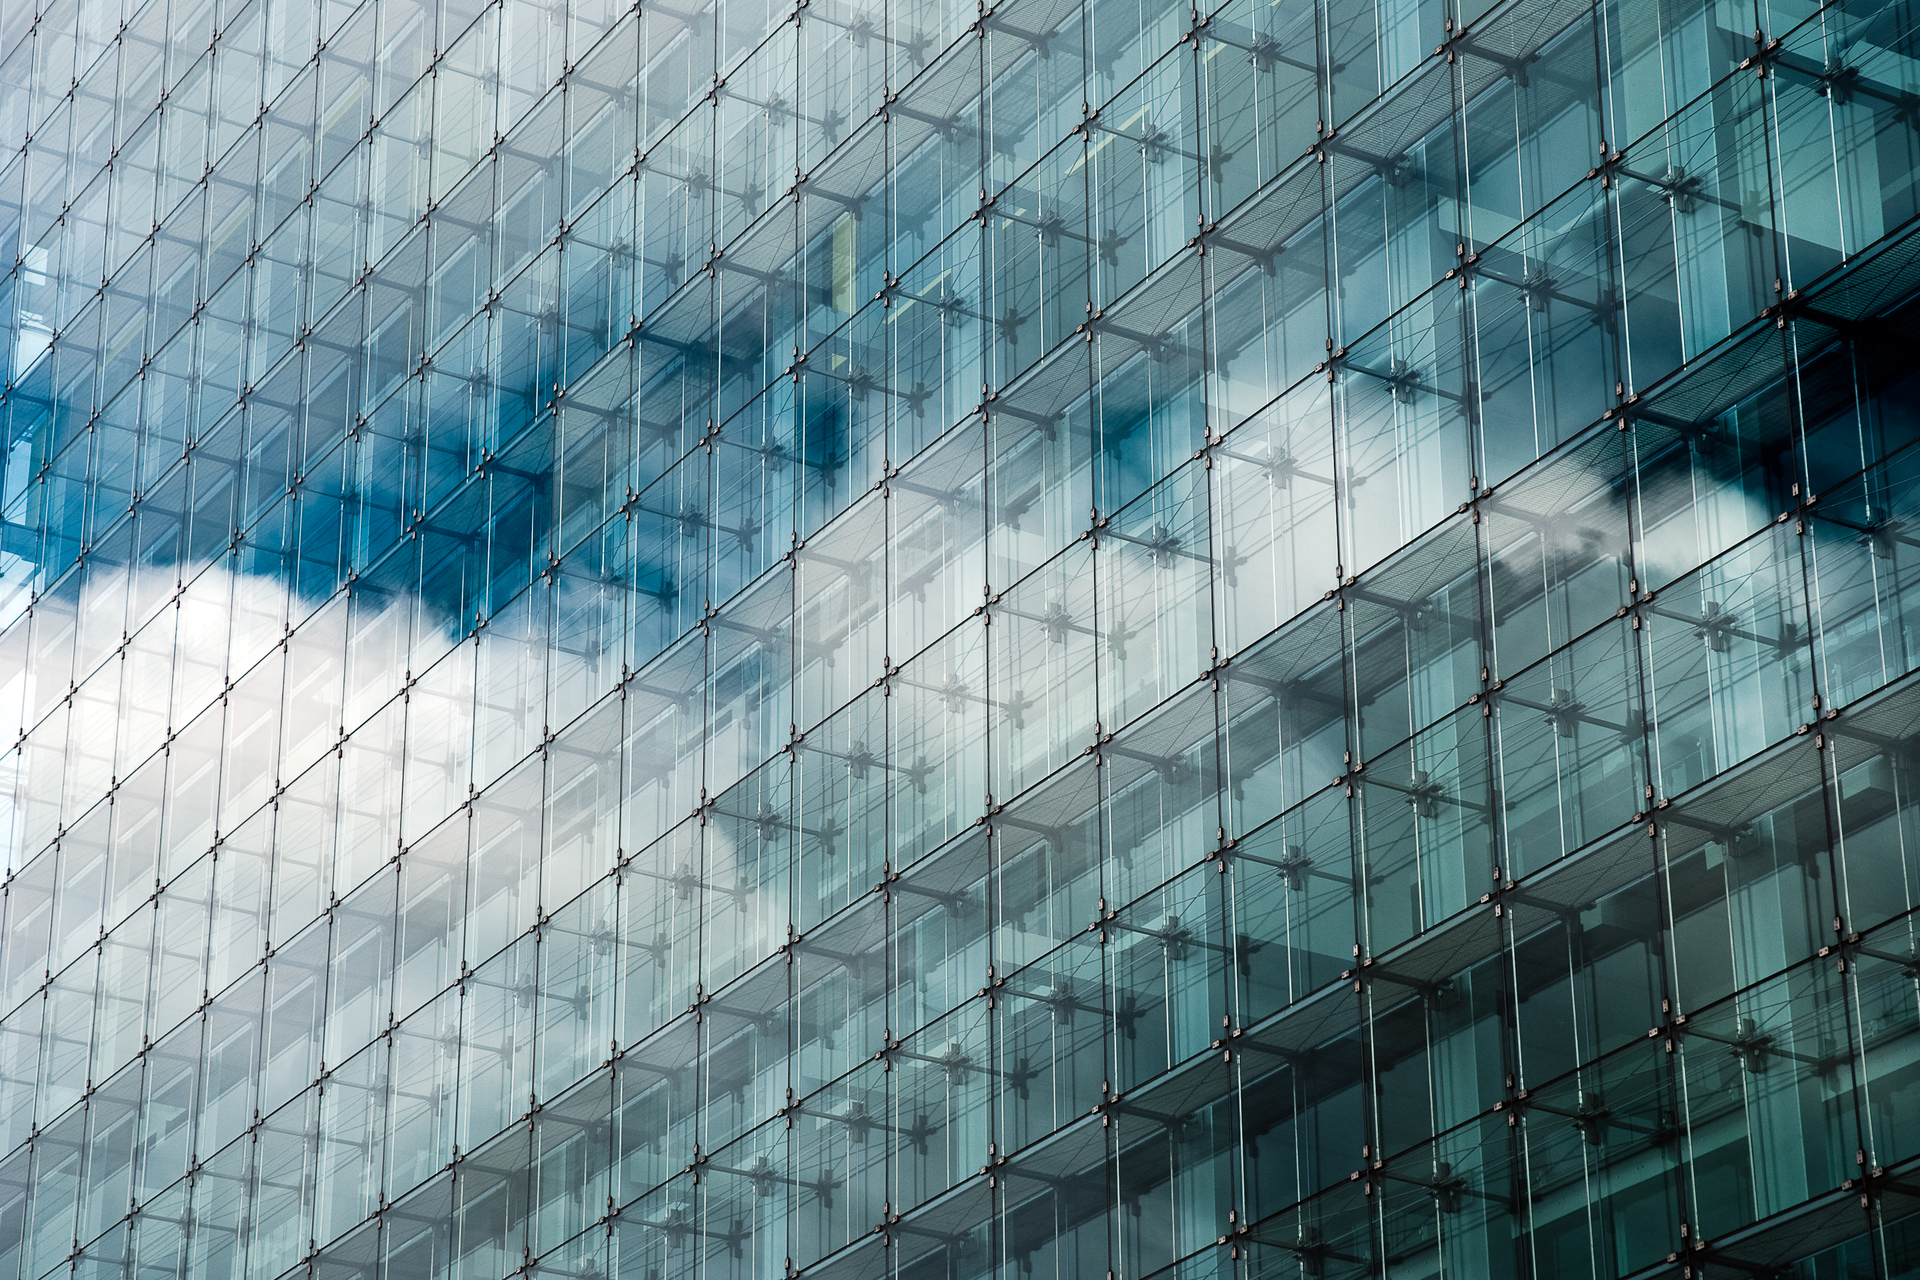 Blue, clouded sky reflected in glass frontage of urban